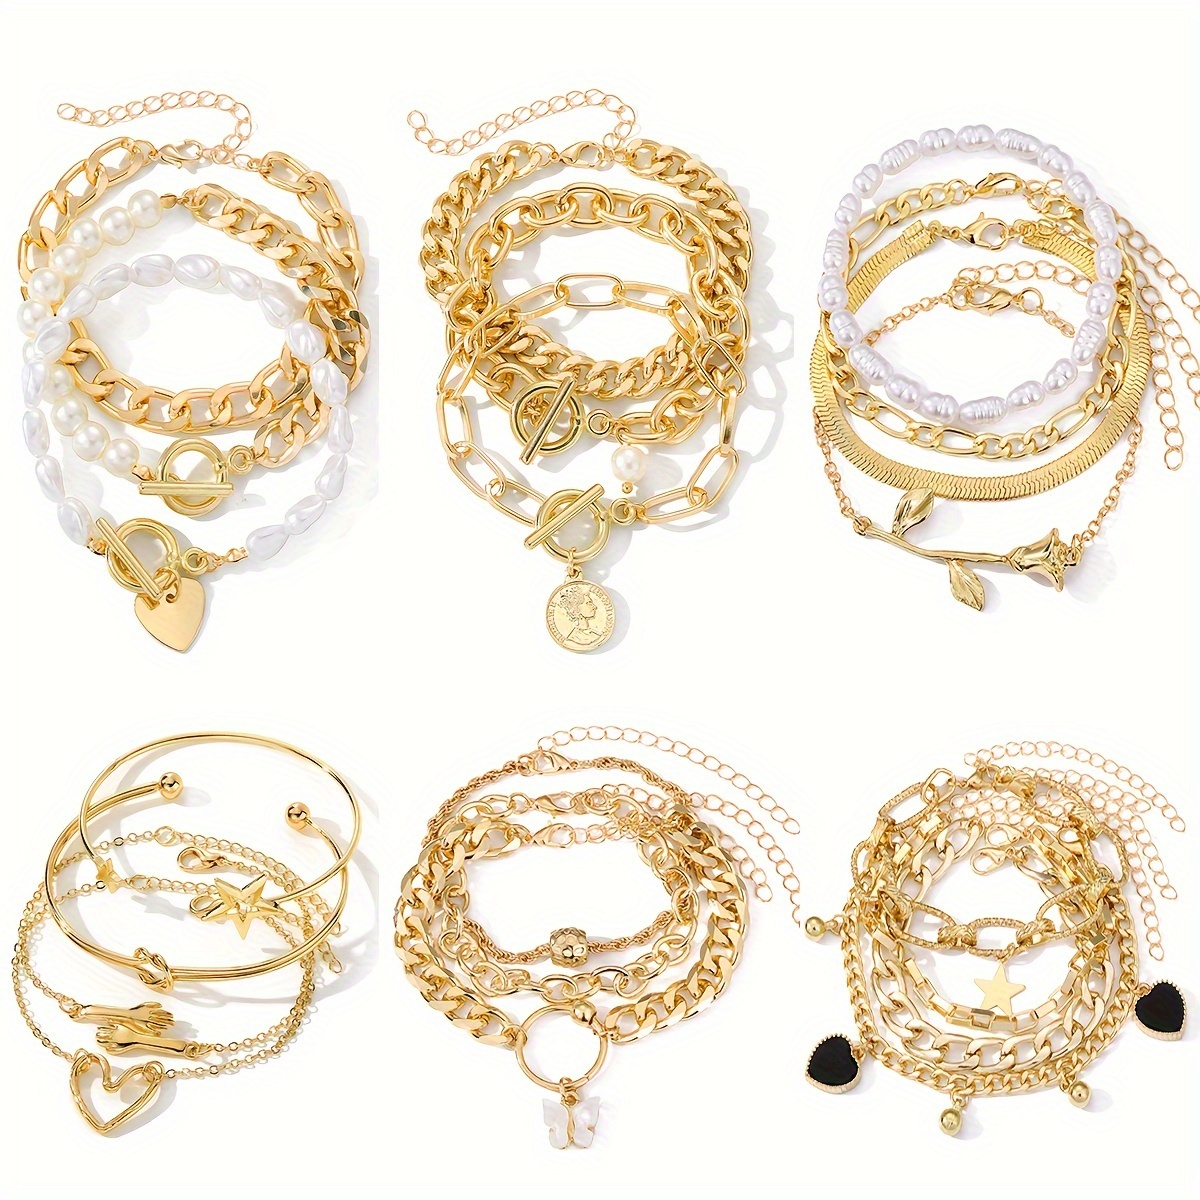 

21-piece Set, Vintage & Simple Style Goldenlayered Bracelet Combo, Fashion Faux Pearl And Cuban Link Mixed Metal, Heart & Rose Charms, Chain Bracelet & Bangle Set For Women, Jewelry Gift